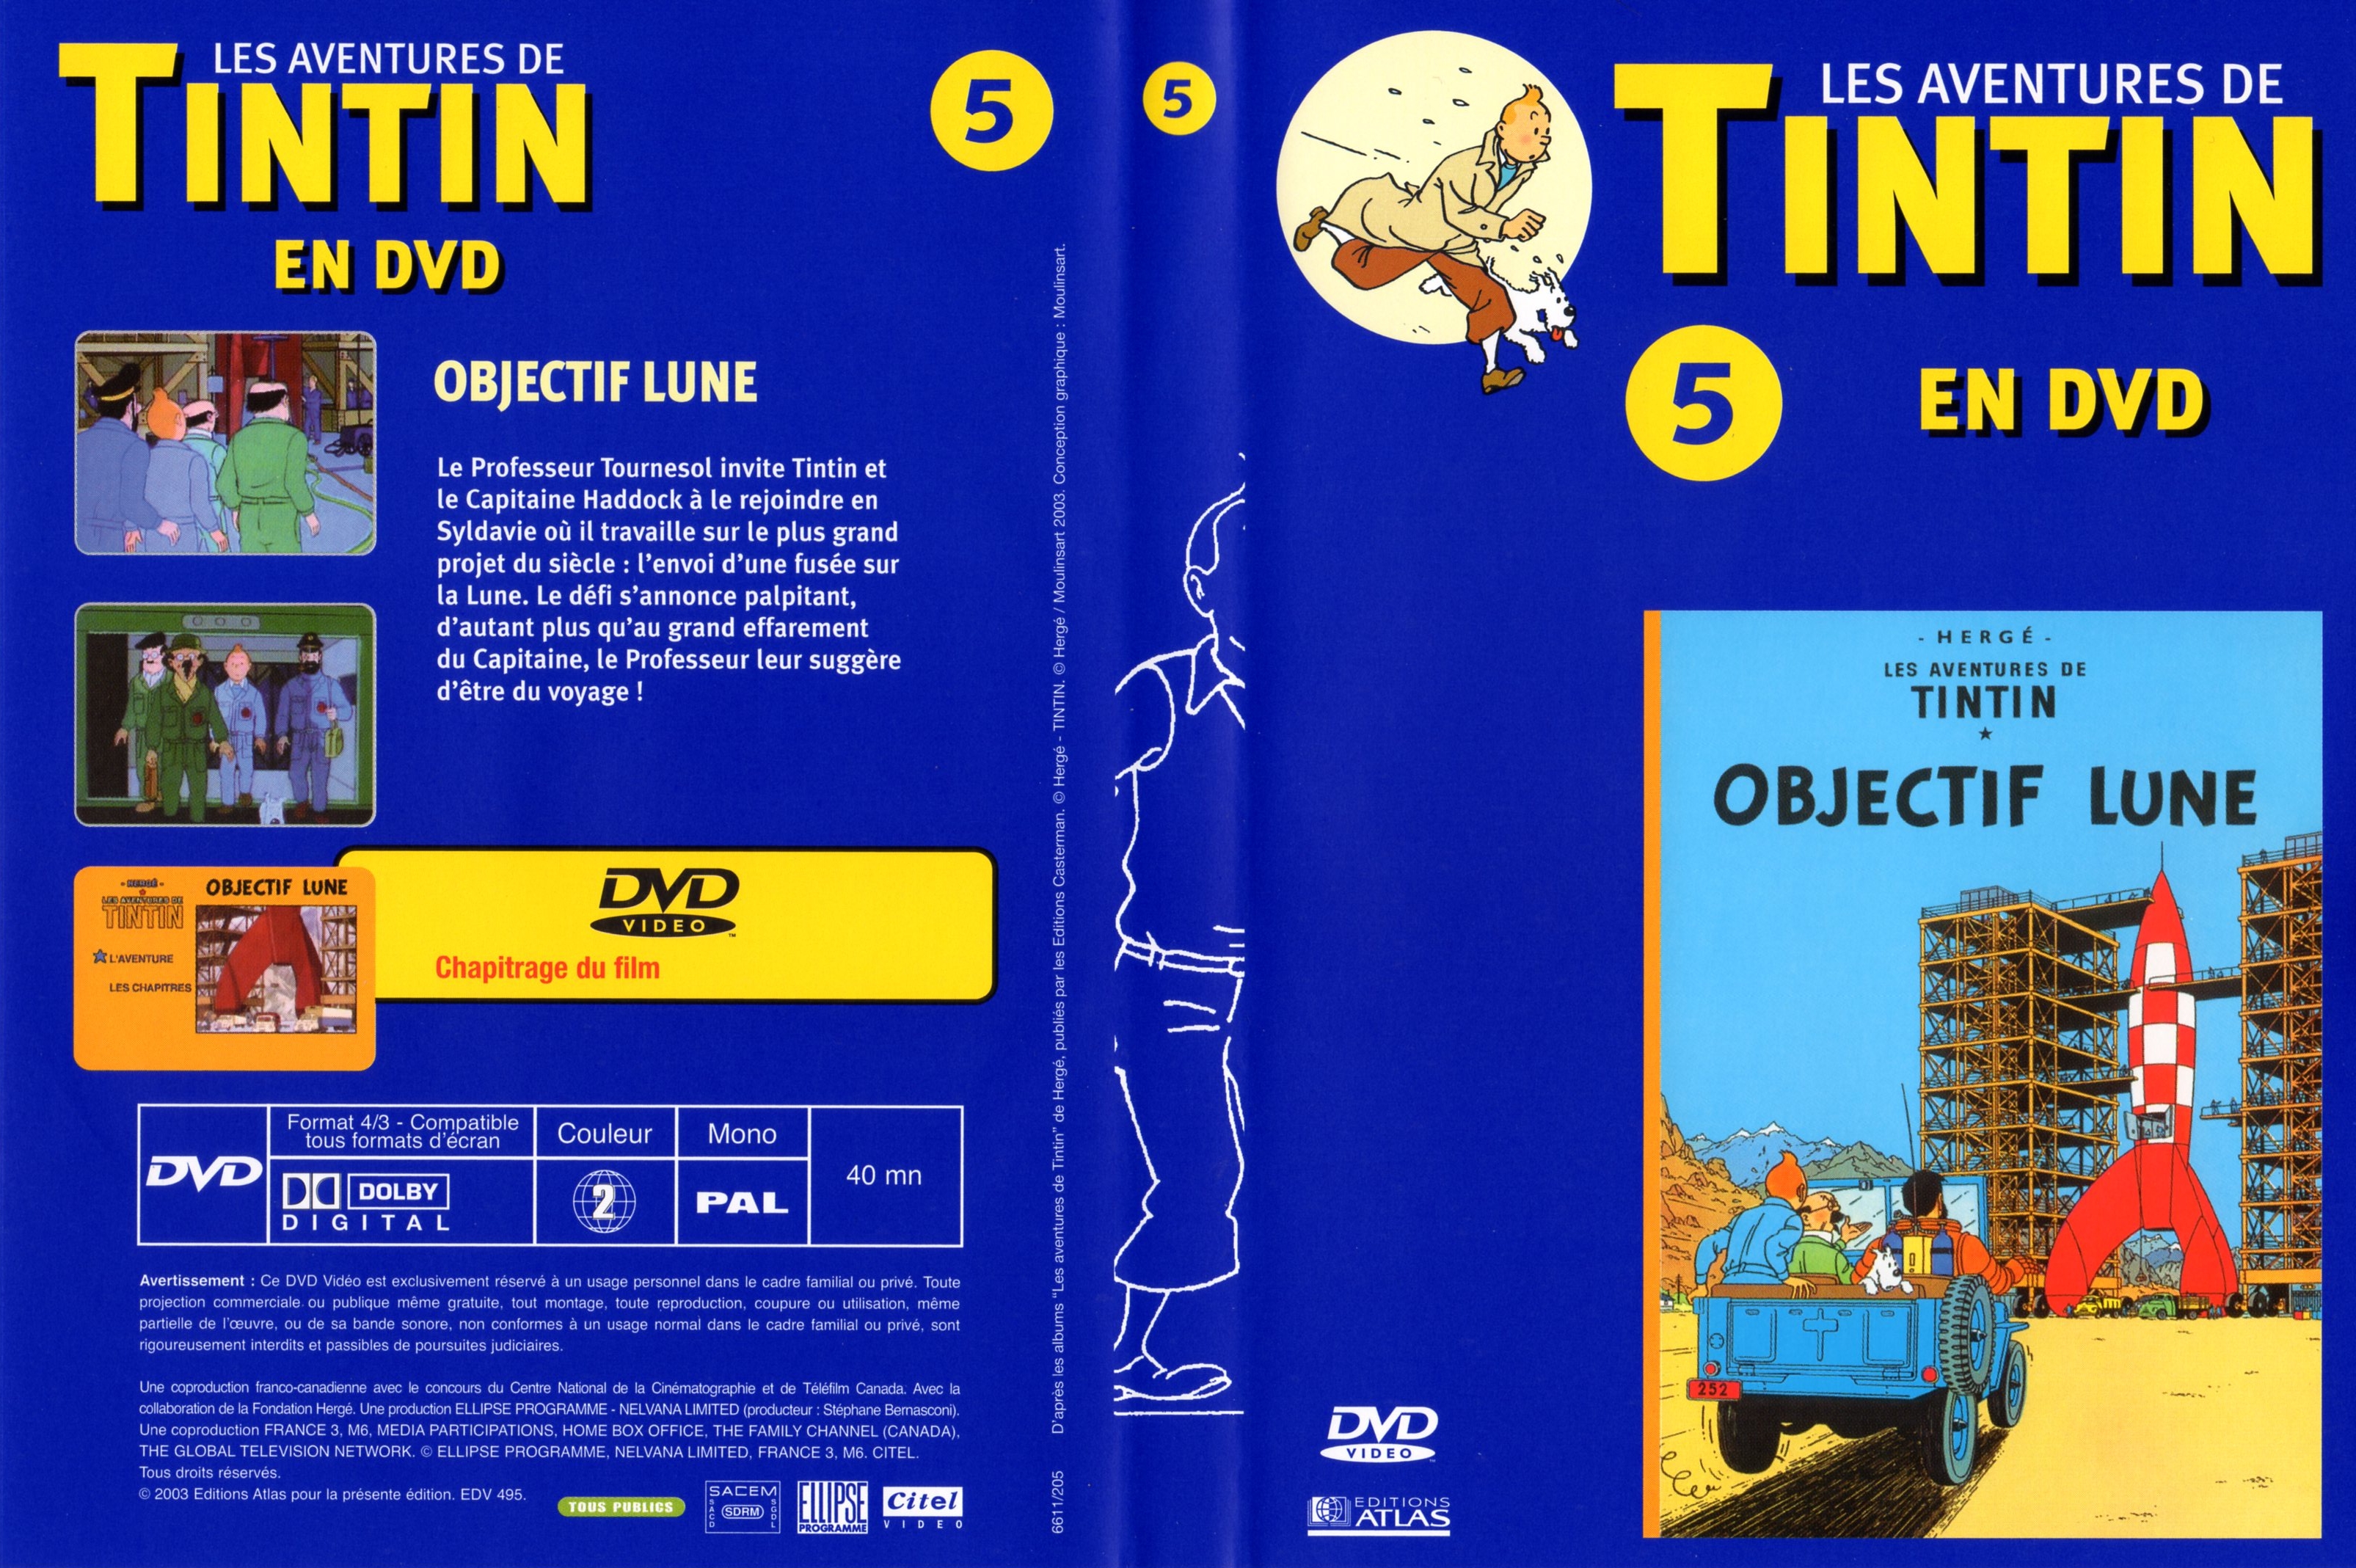 Jaquette DVD Tintin - vol 5 - Objectif lune